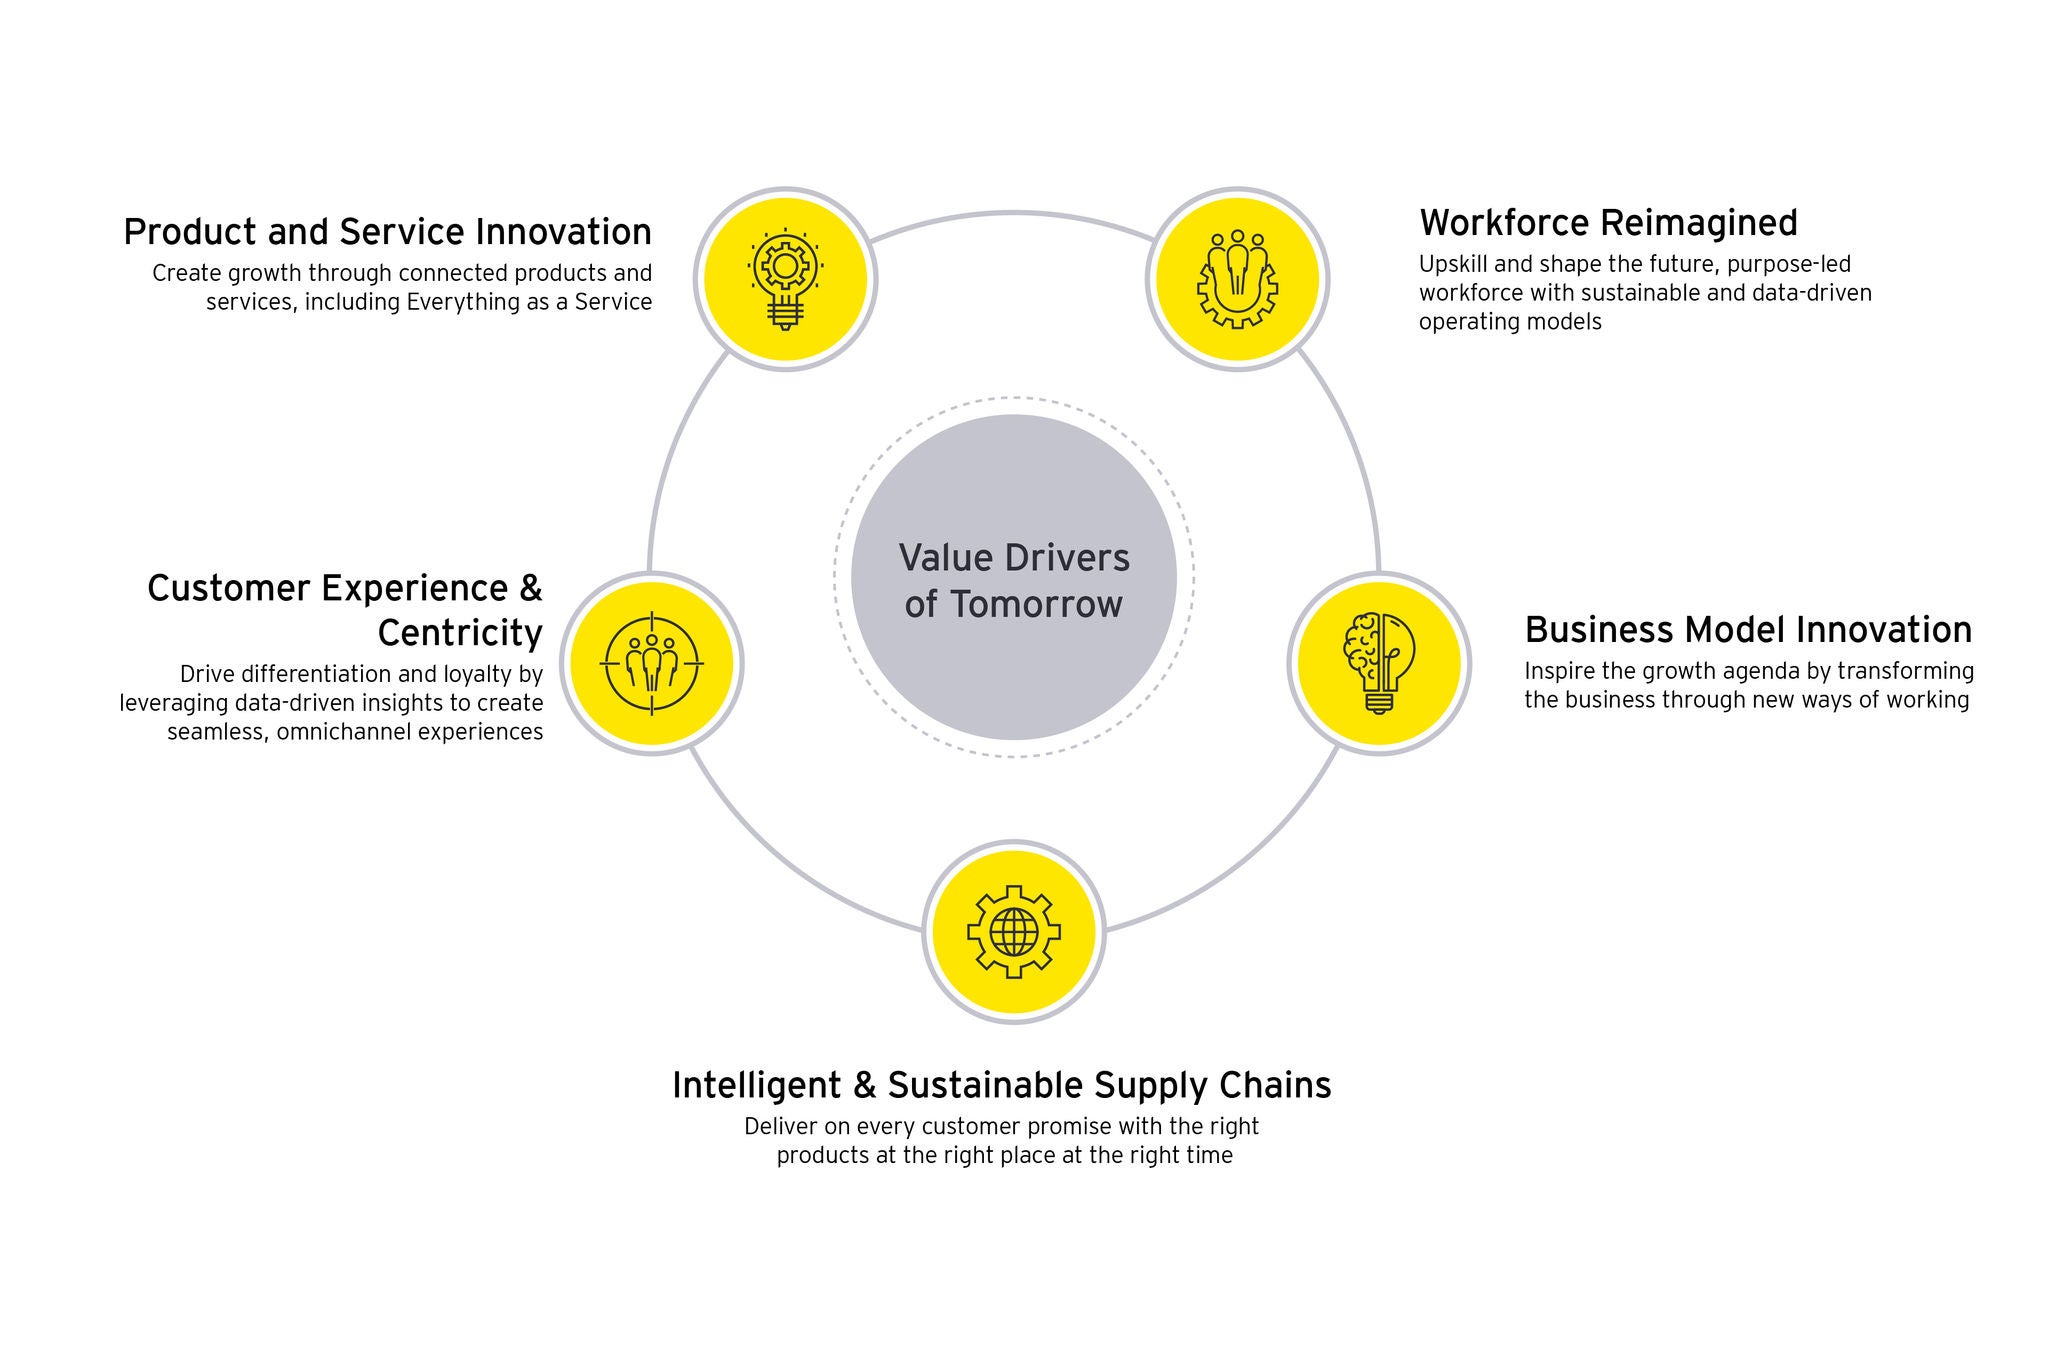 Value drivers of tomorrow